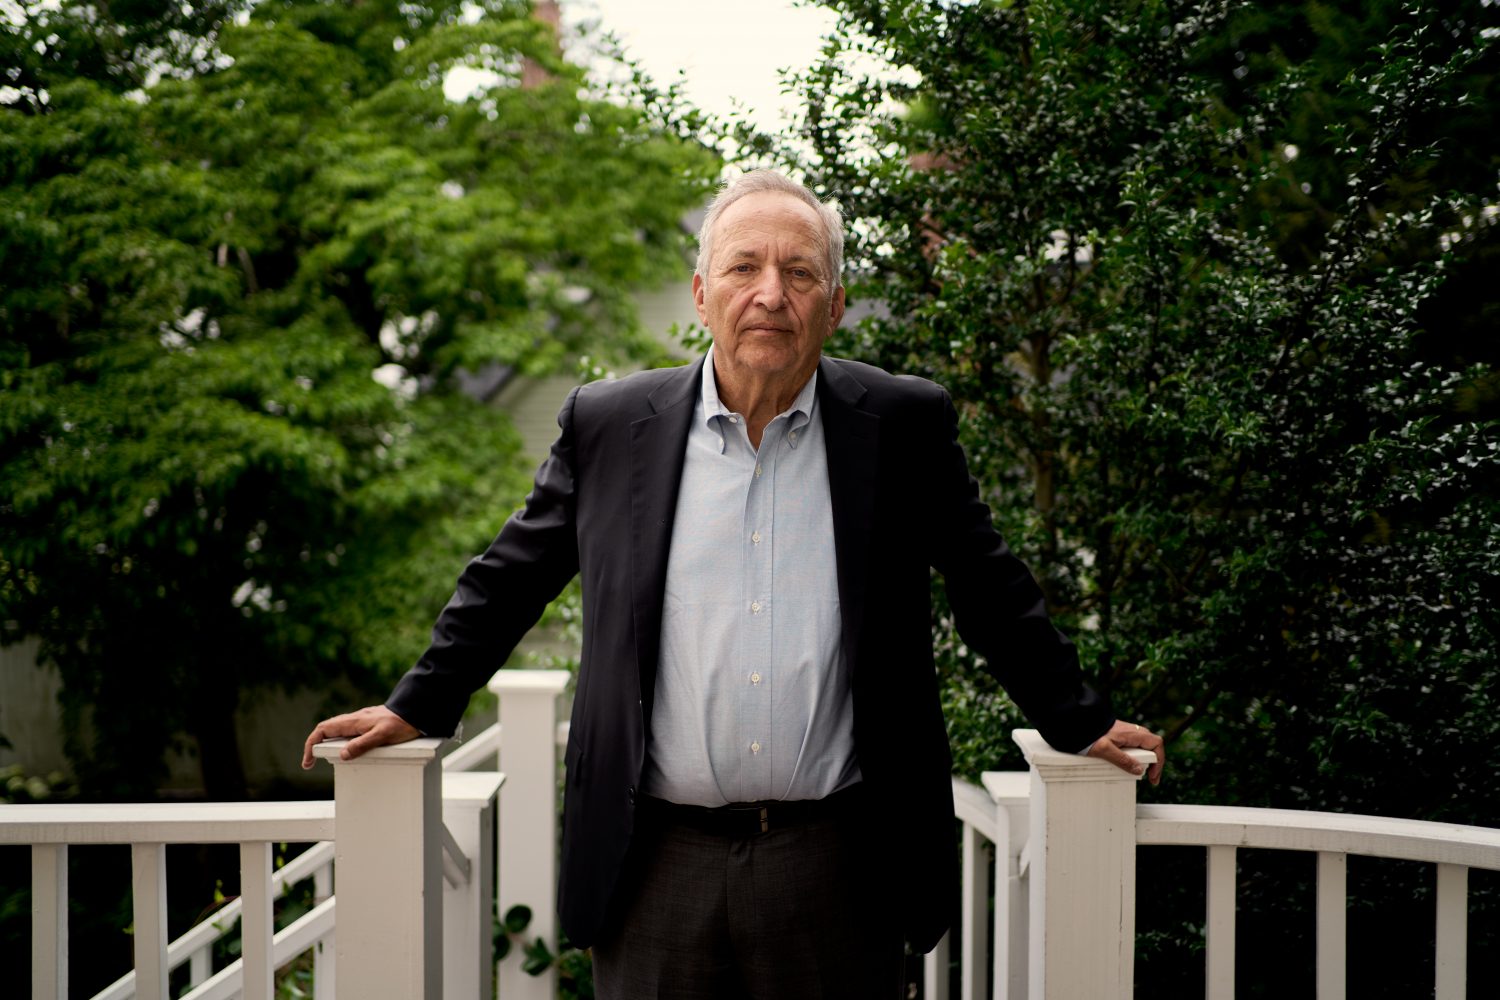 Location portrait of Larry Summers in the suburbs of Boston, for The New York Times